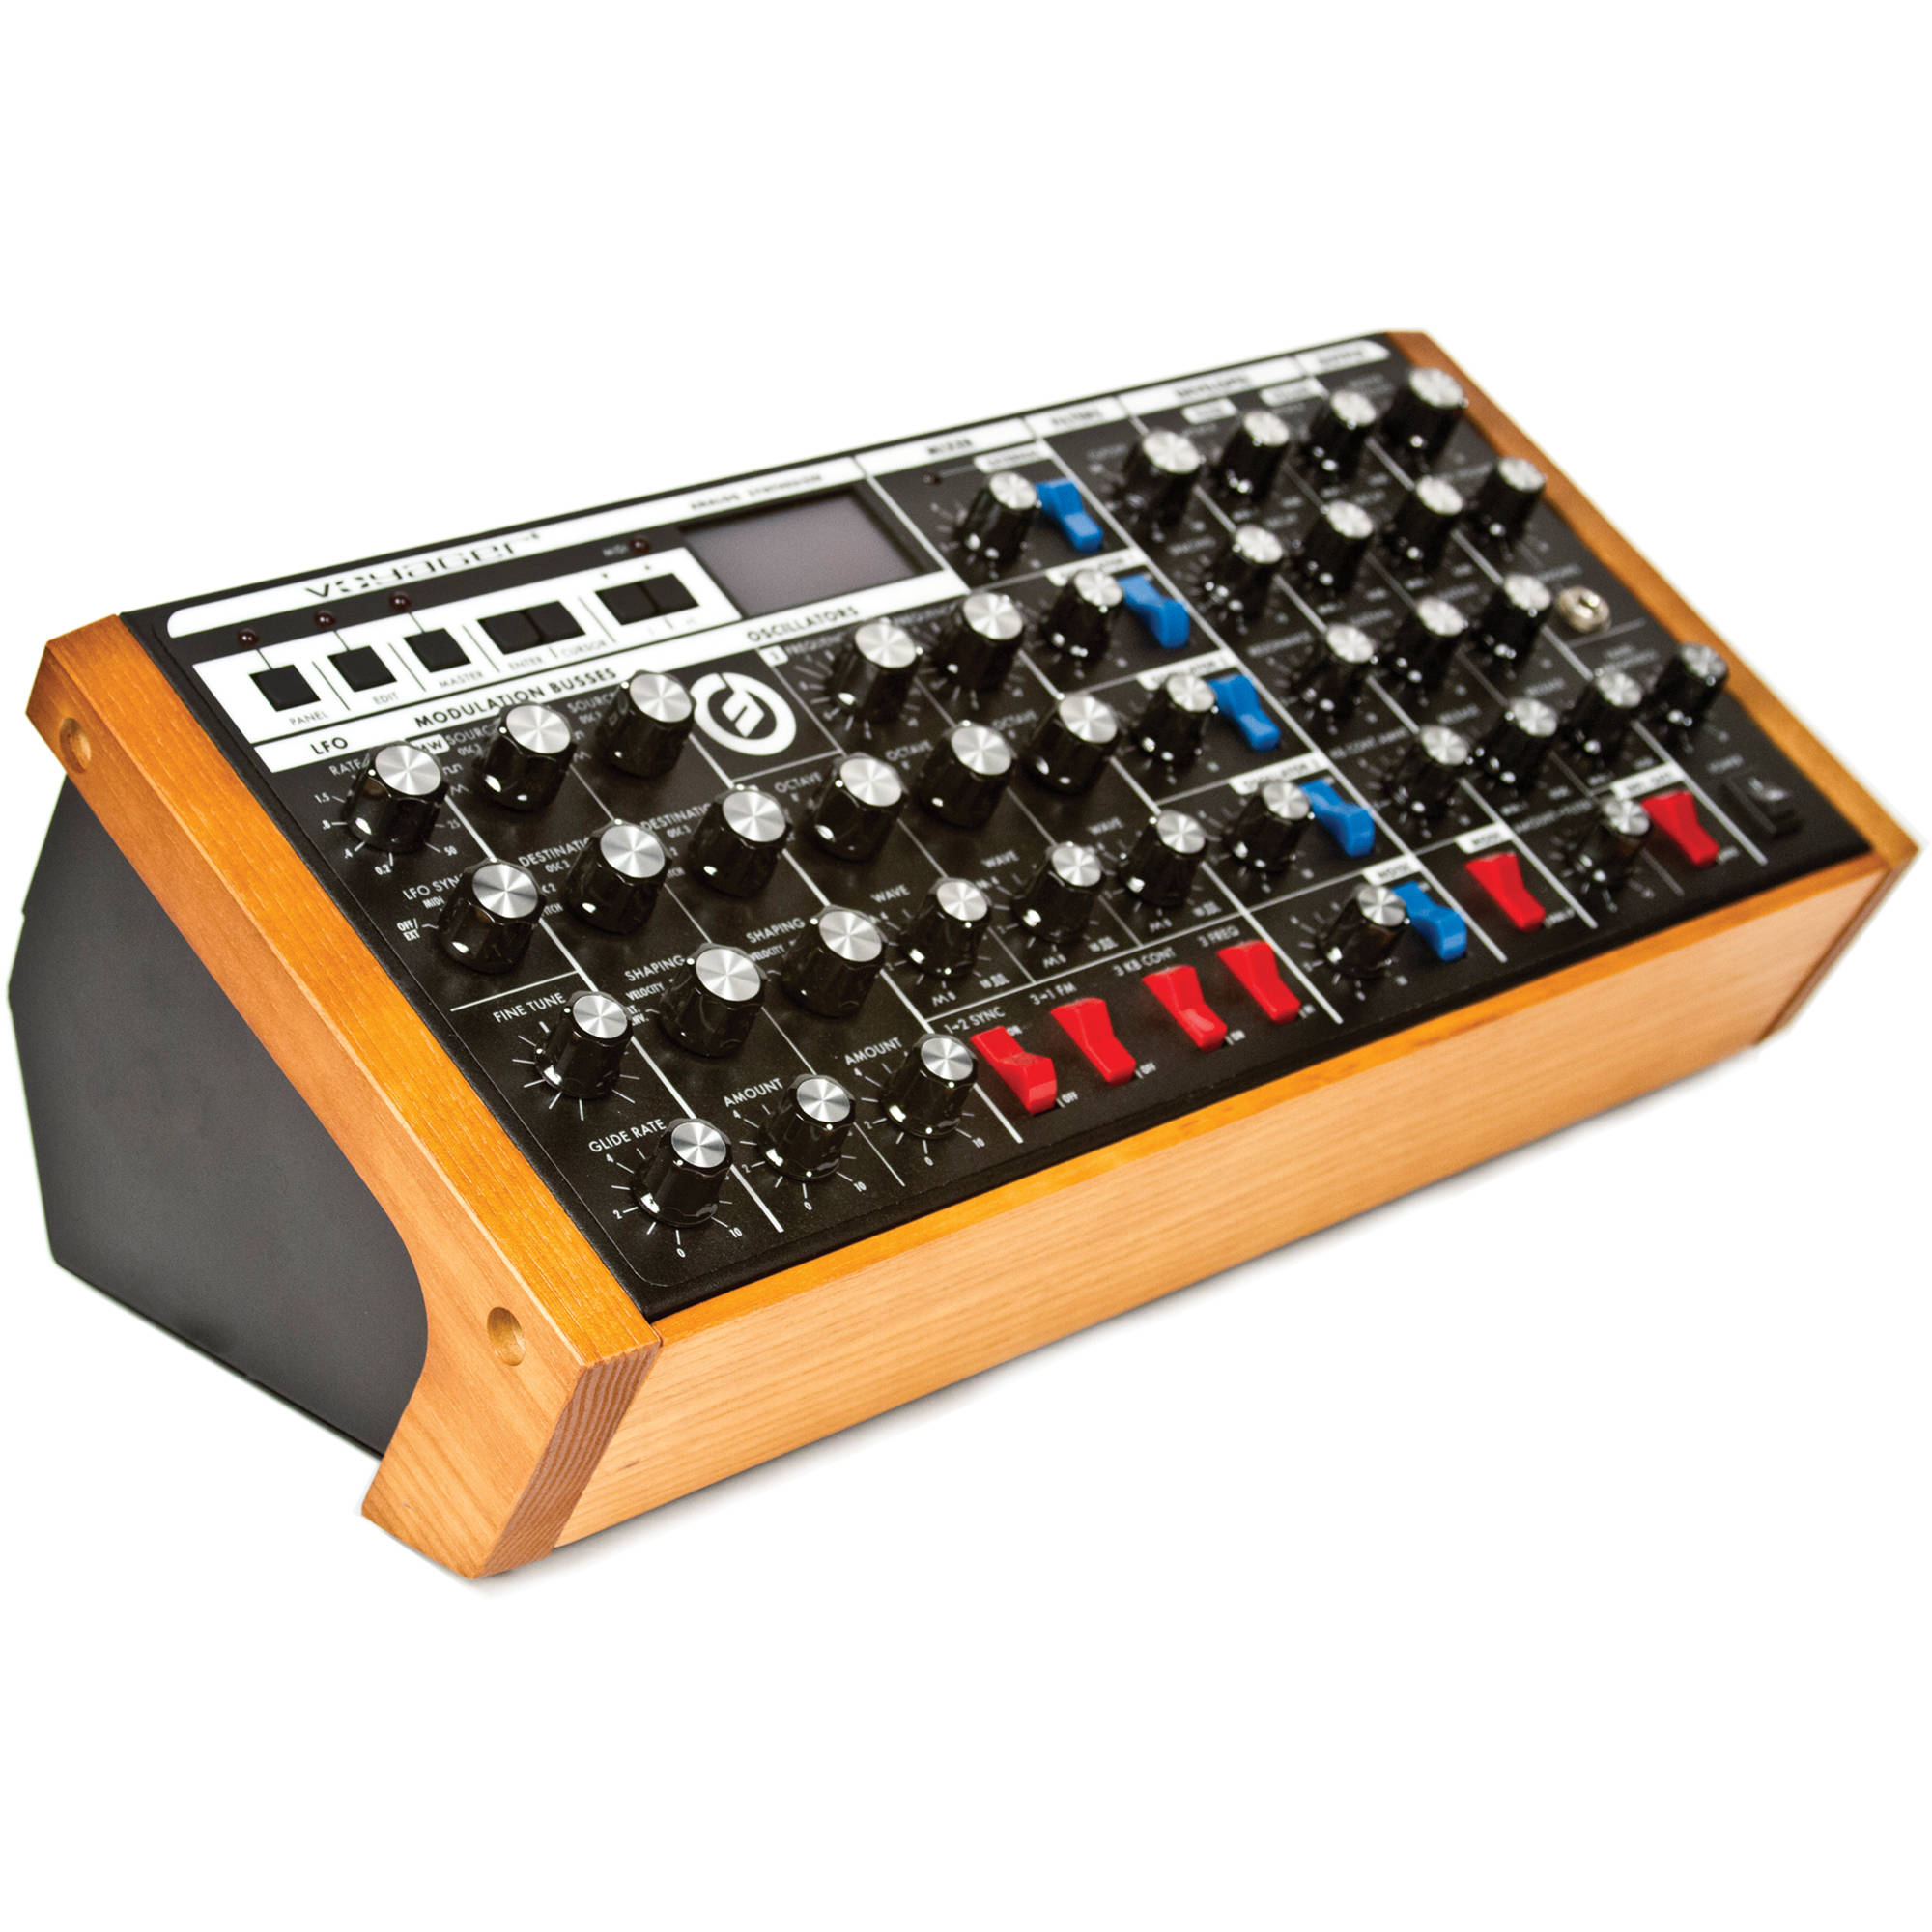 moog voyager rme review